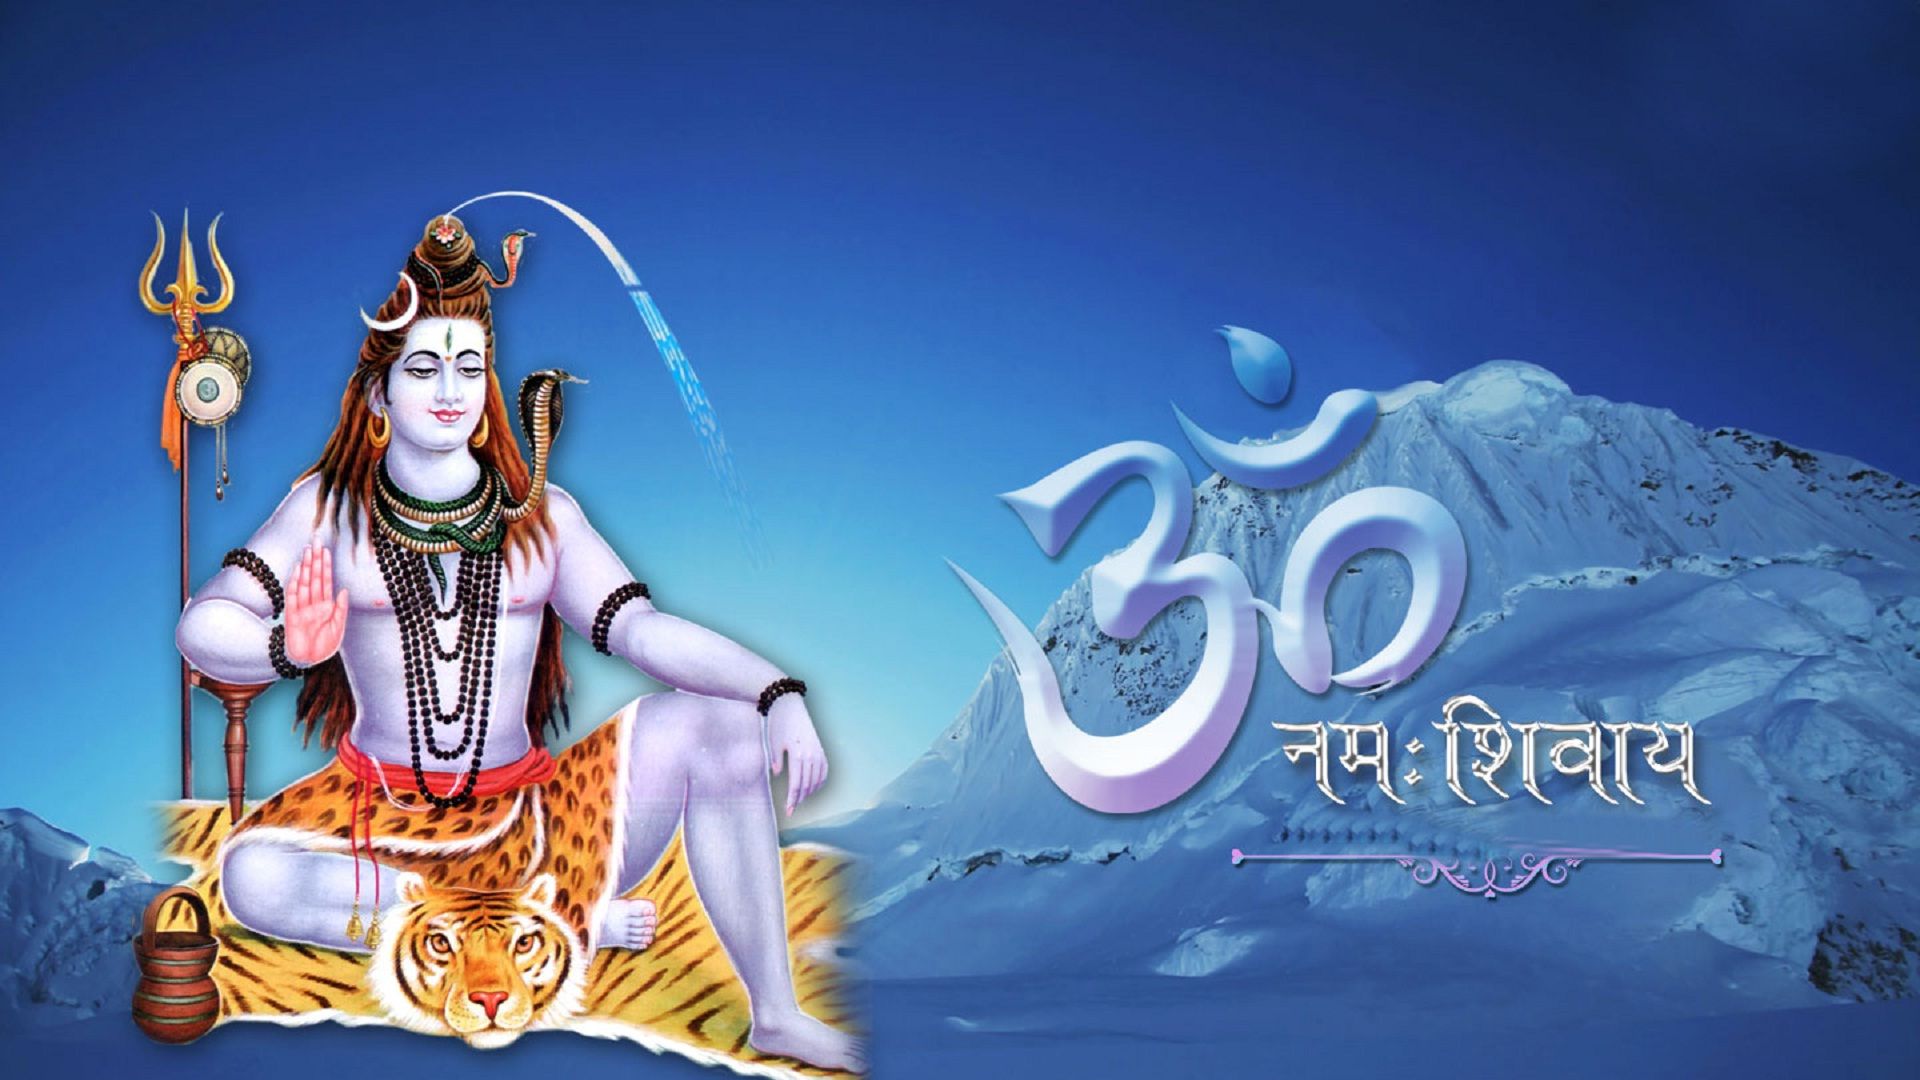 Lord Shiva Images For Whatsapp Dp | Hindu Gods and Goddesses